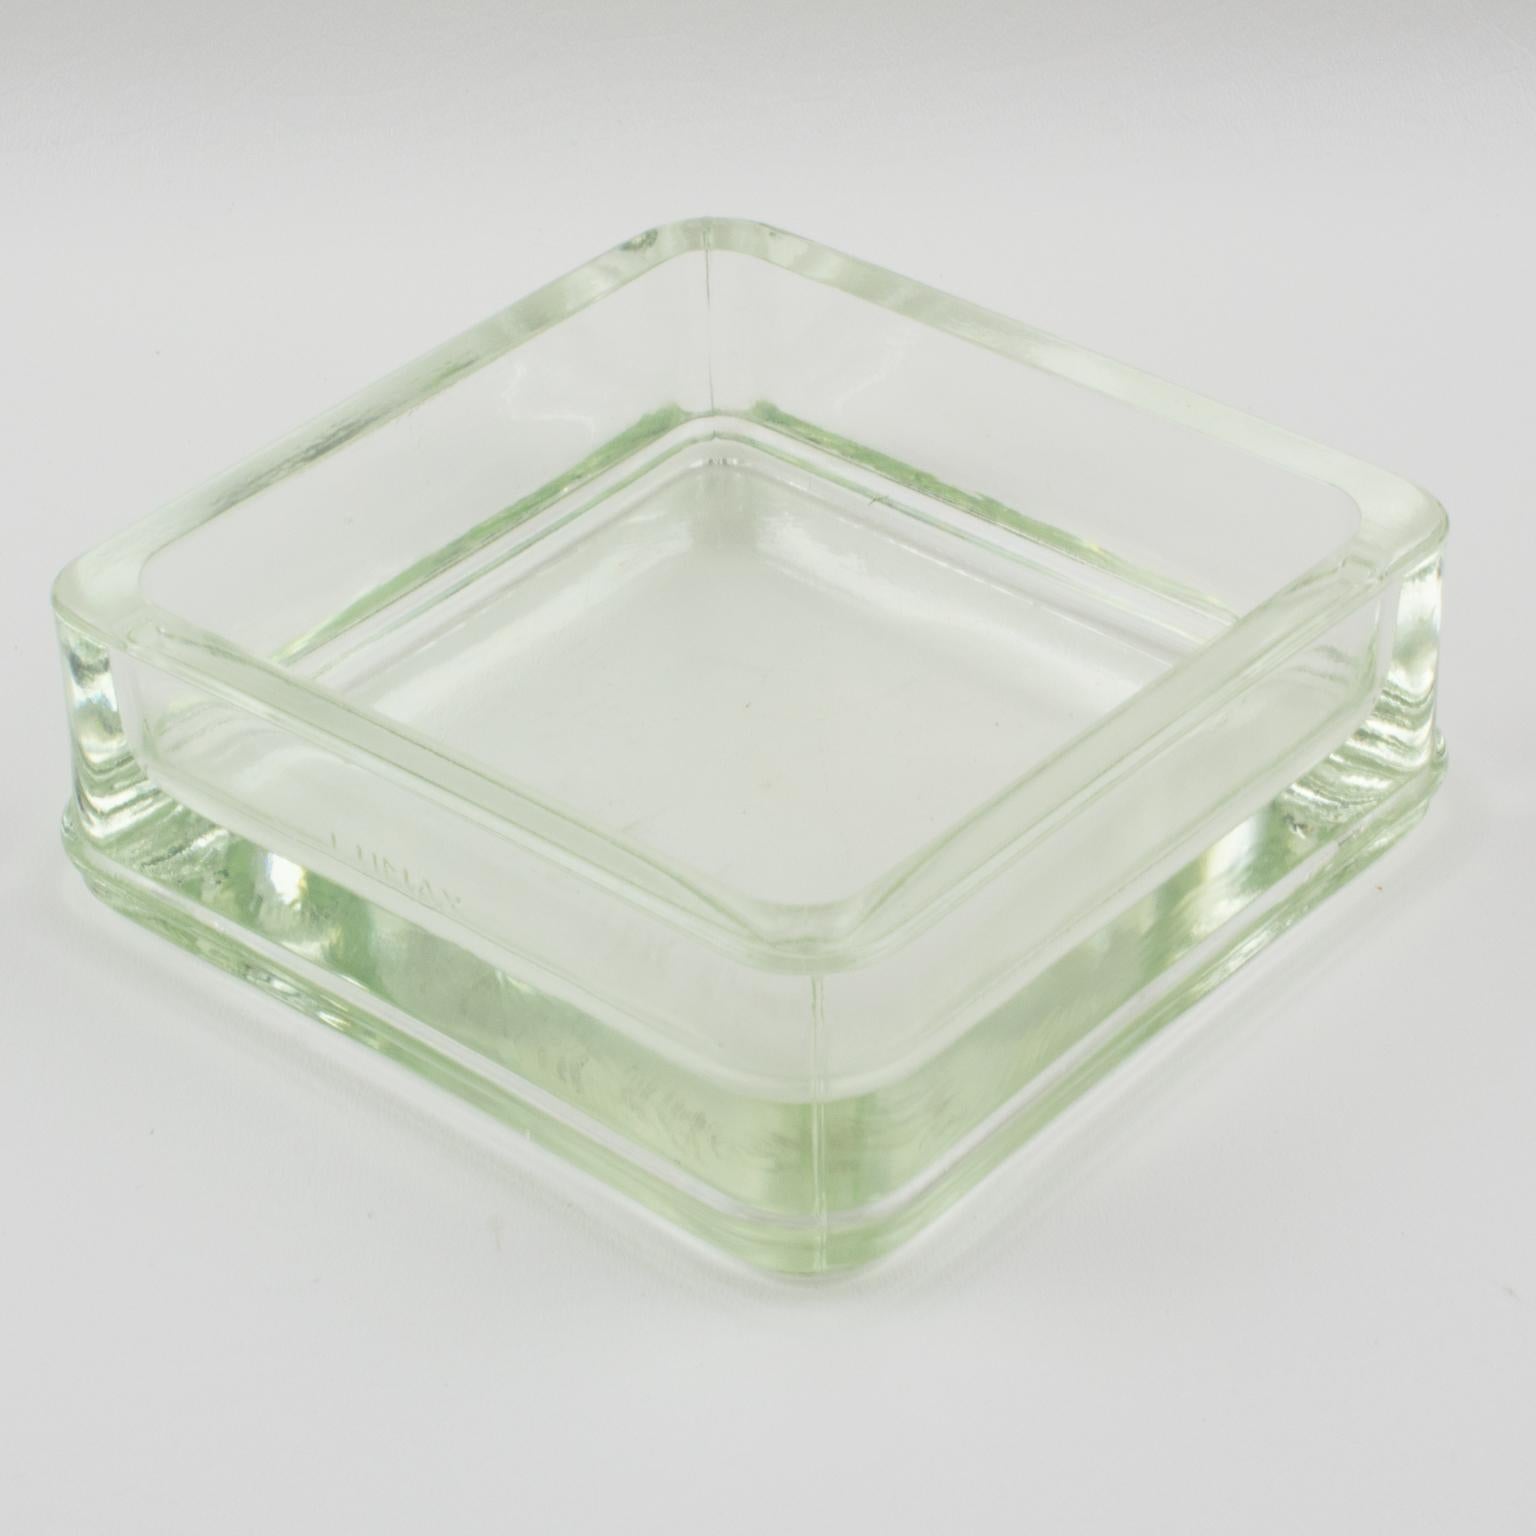 Mid-20th Century Le Corbusier for Lumax Molded Glass Ashtray Catchall